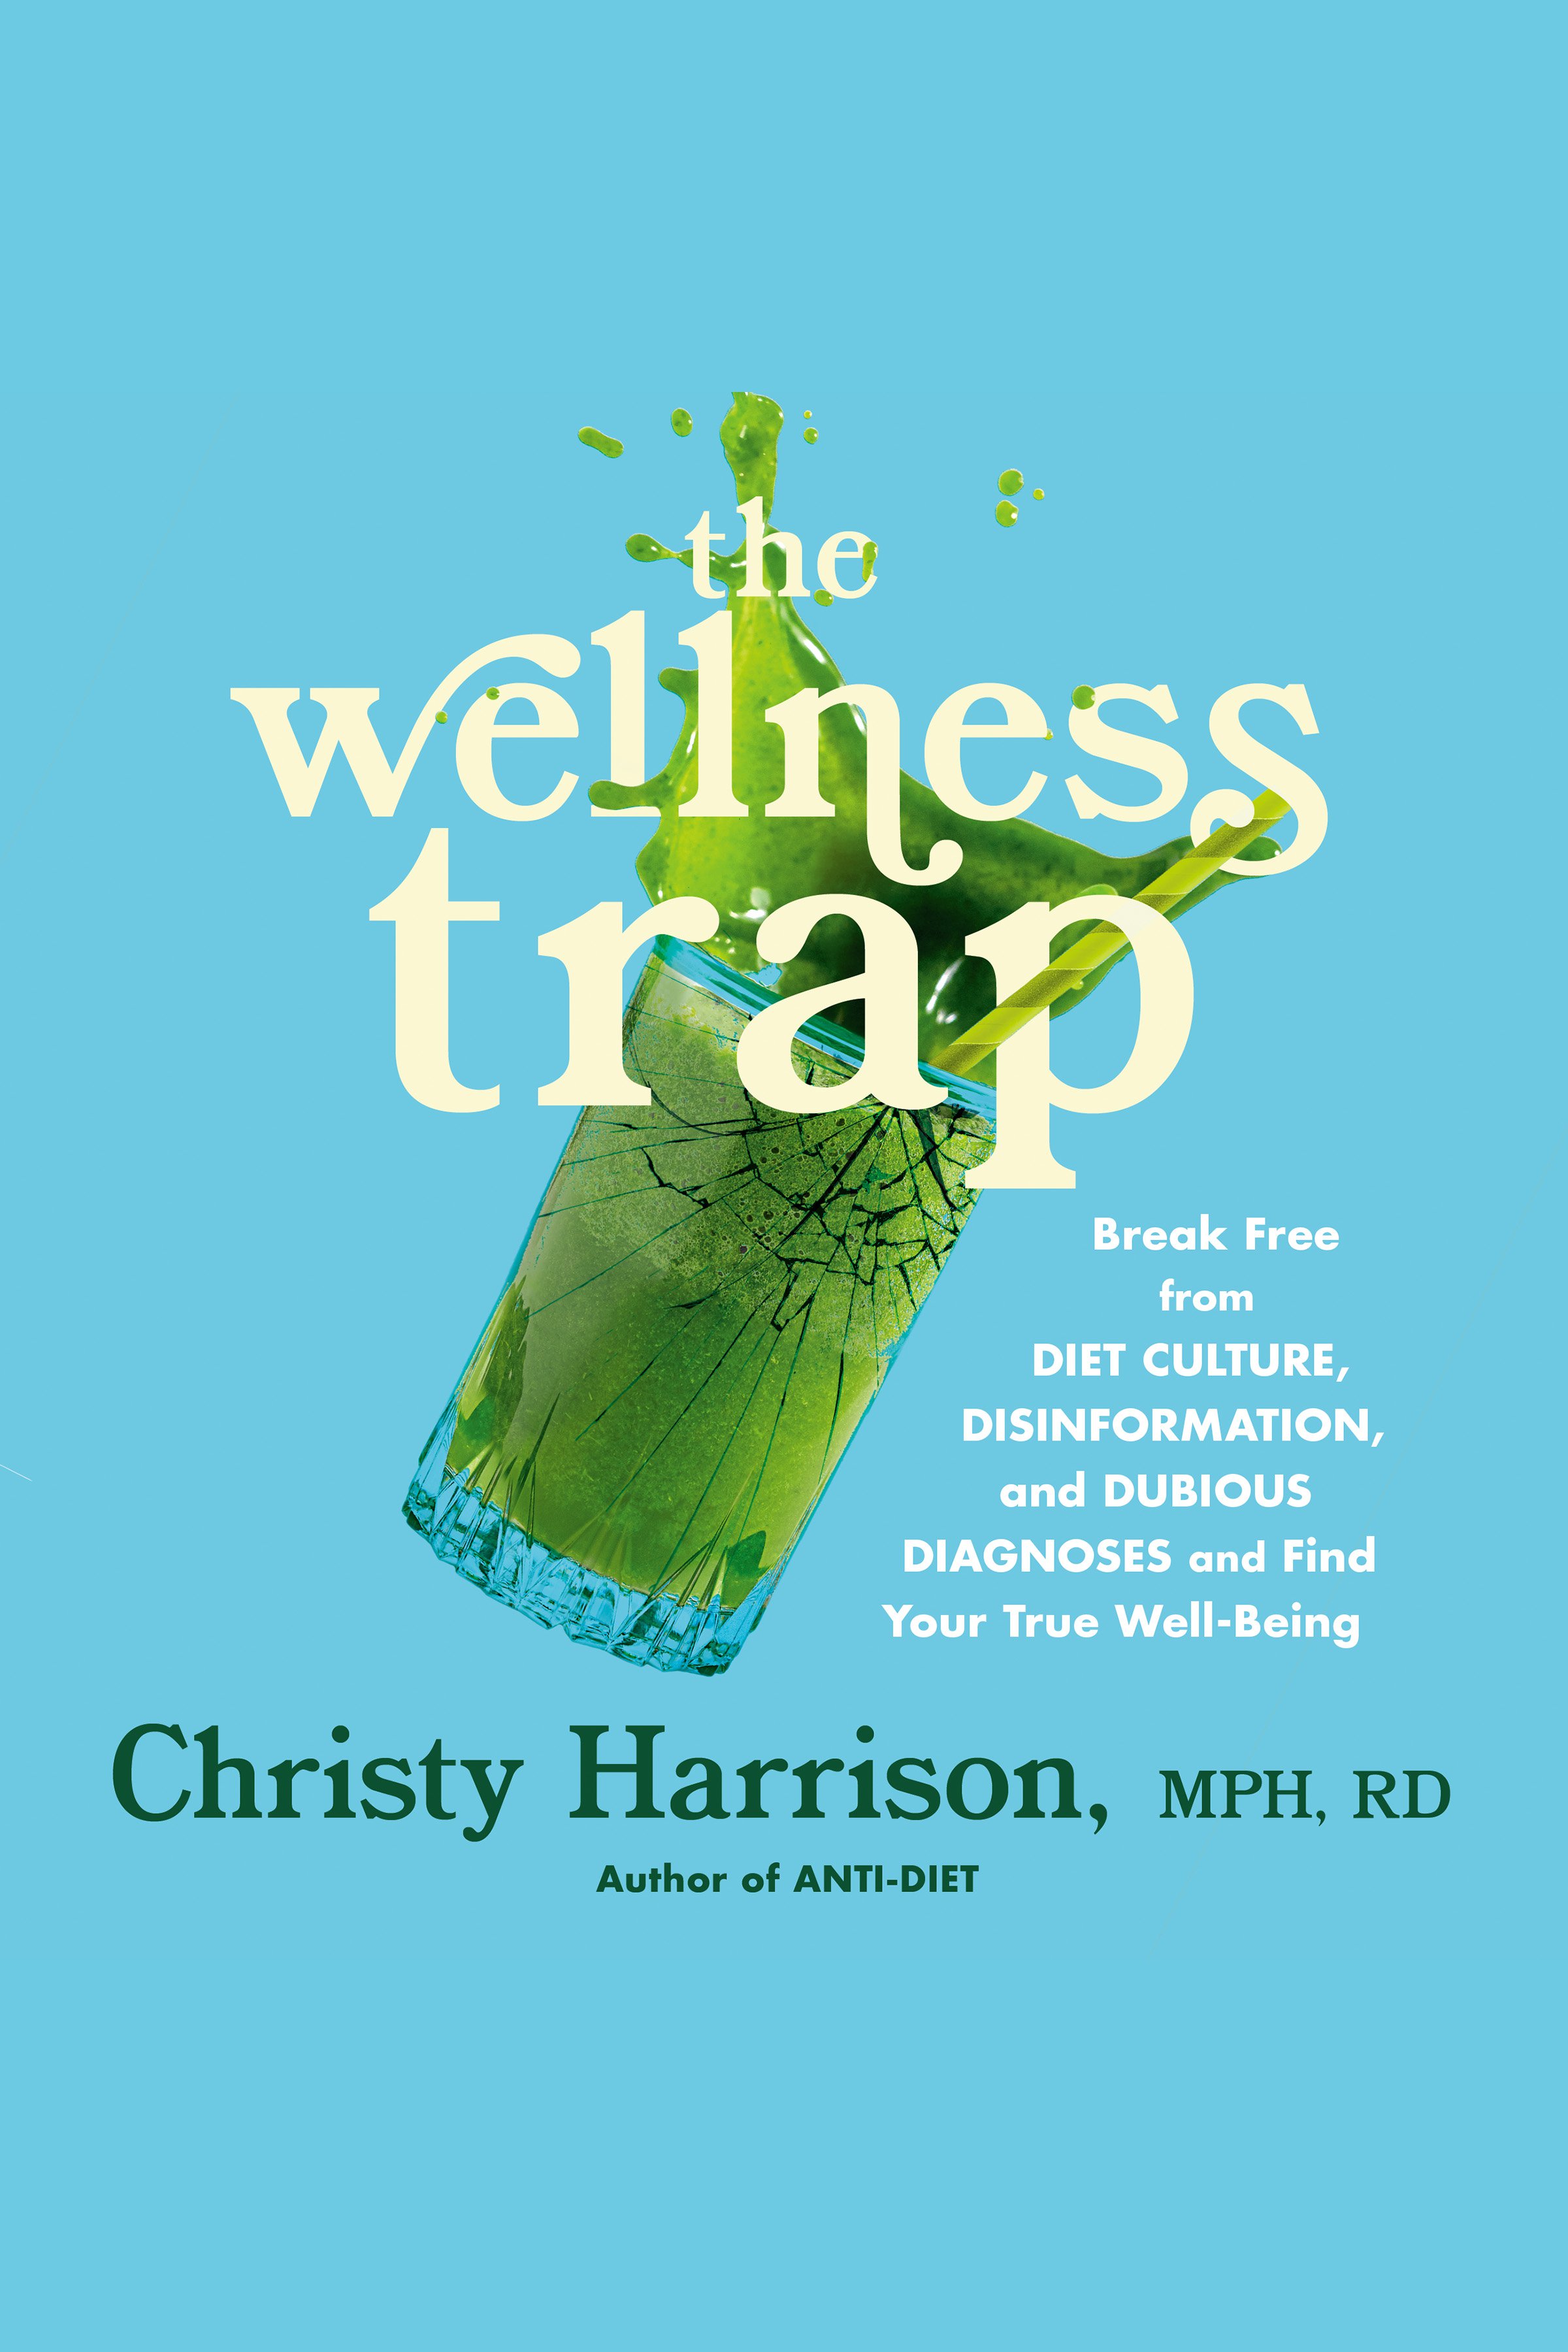 The Wellness Trap Break Free from Diet Culture, Disinformation, and Dubious Diagnoses, and Find Your True Well-Being cover image